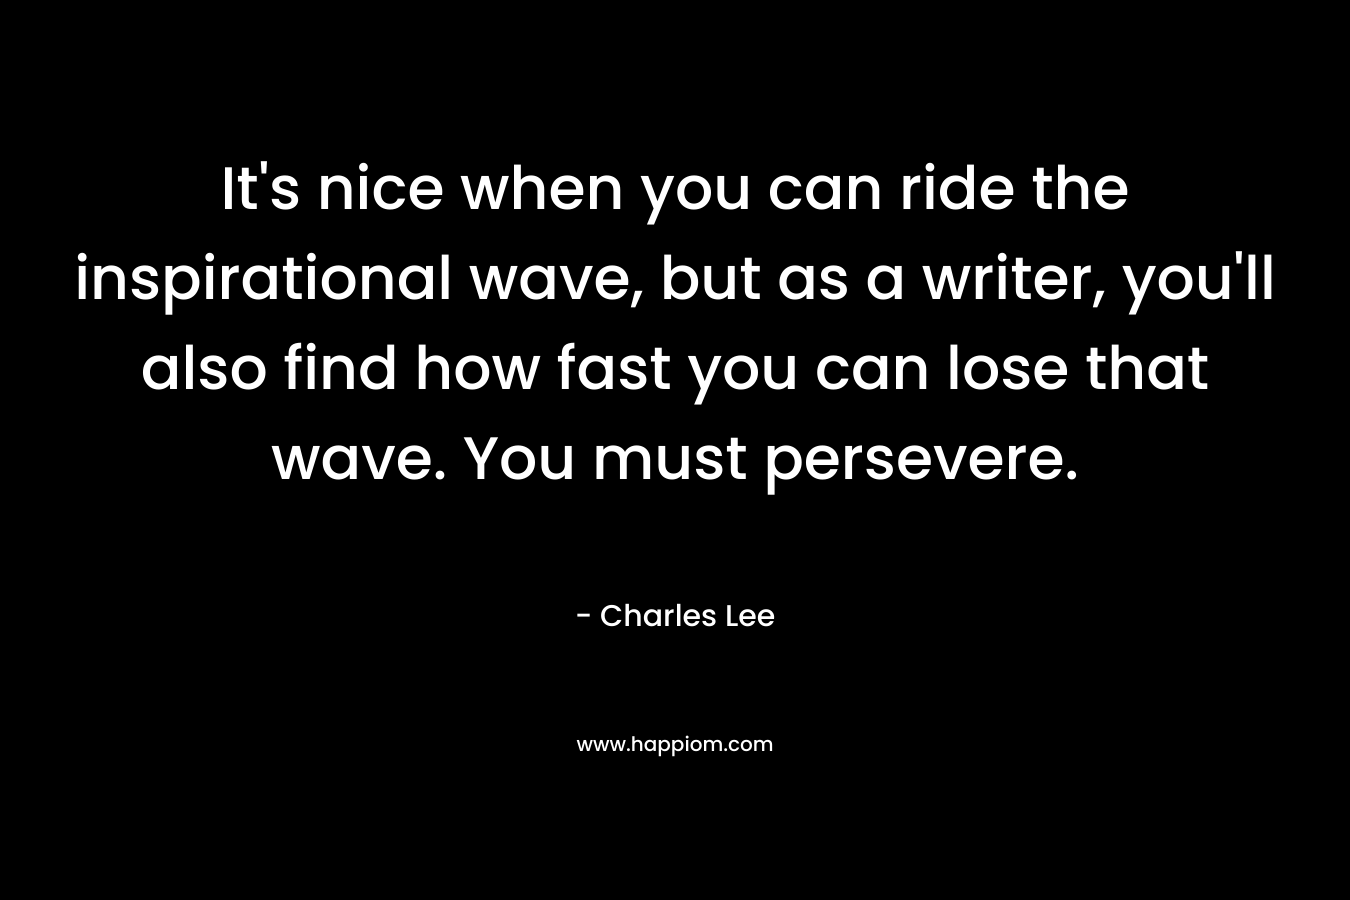 It's nice when you can ride the inspirational wave, but as a writer, you'll also find how fast you can lose that wave. You must persevere.